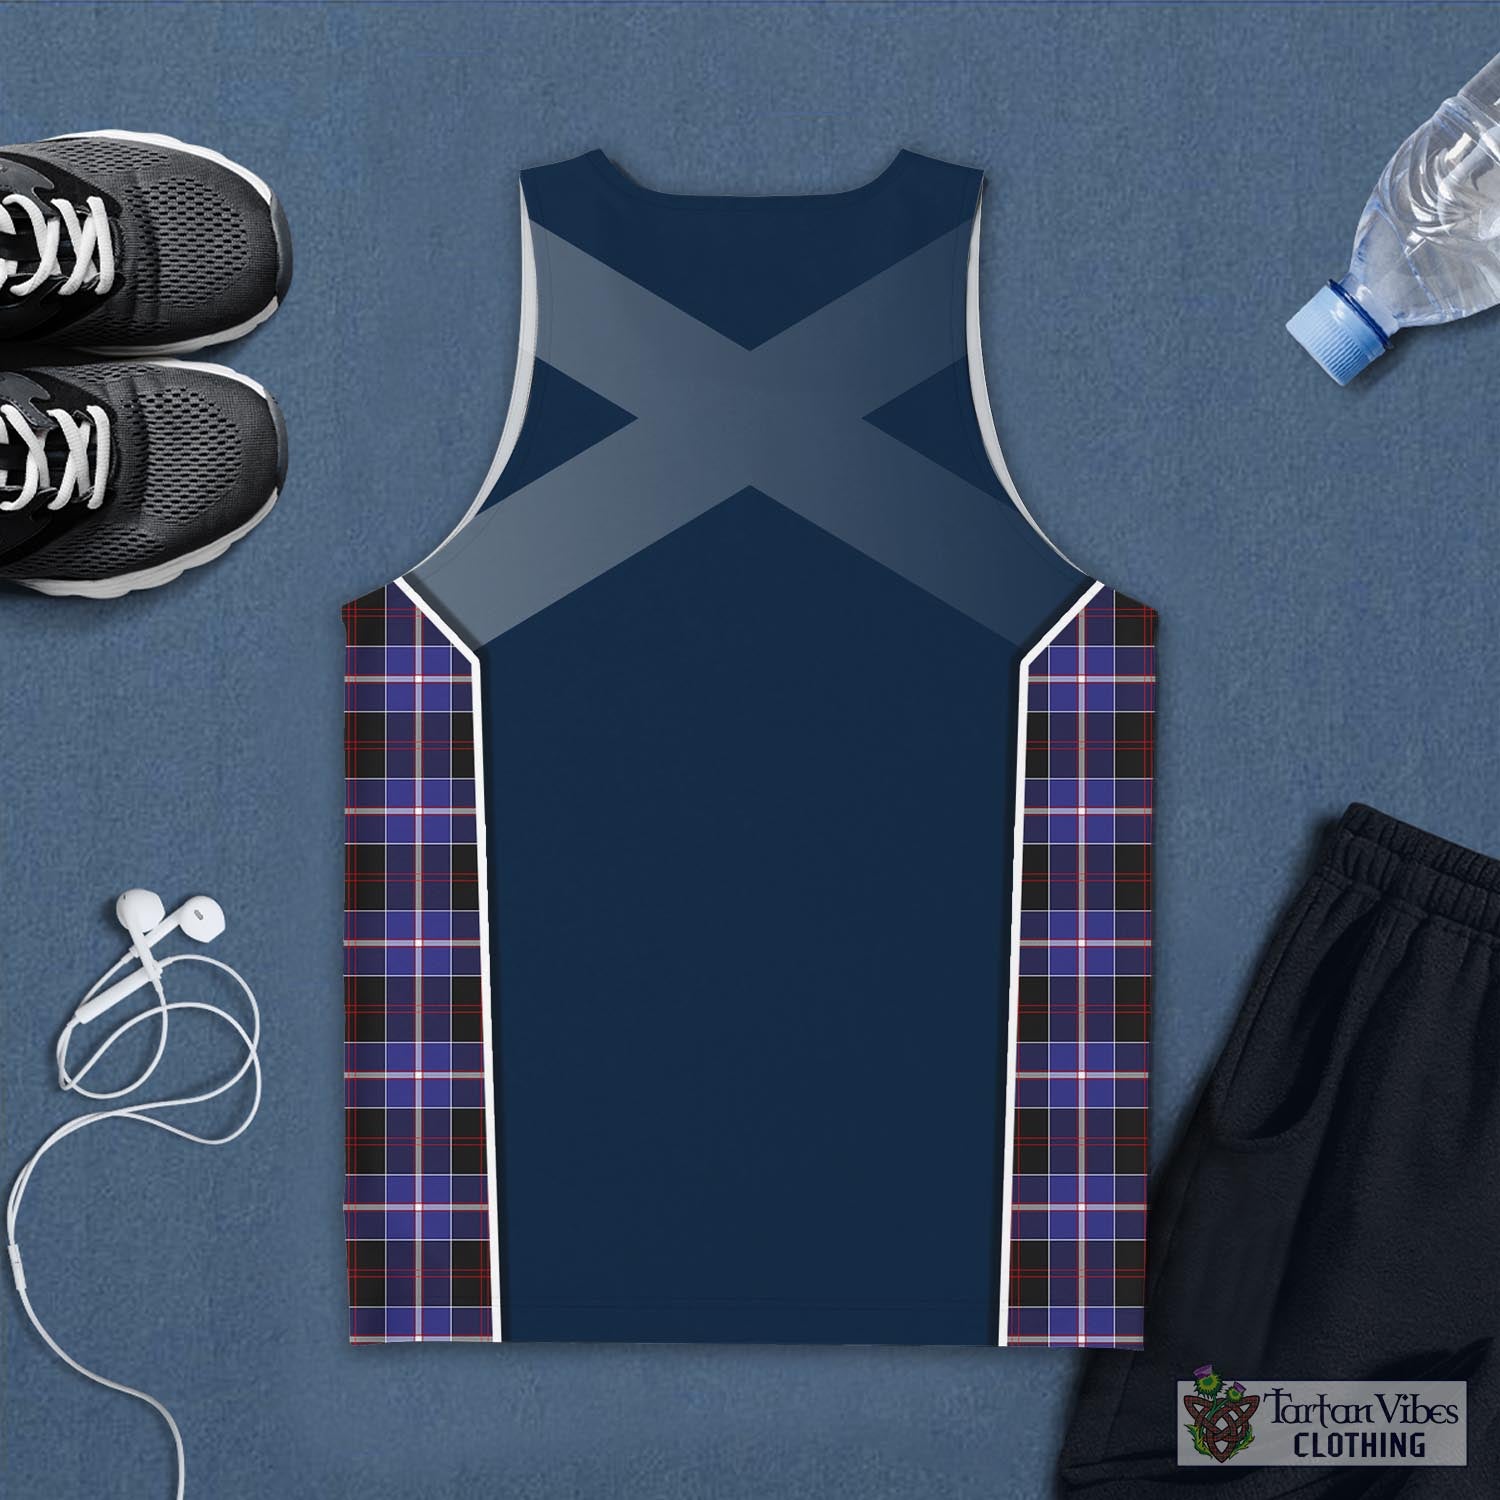 Tartan Vibes Clothing Dunlop Modern Tartan Men's Tanks Top with Family Crest and Scottish Thistle Vibes Sport Style